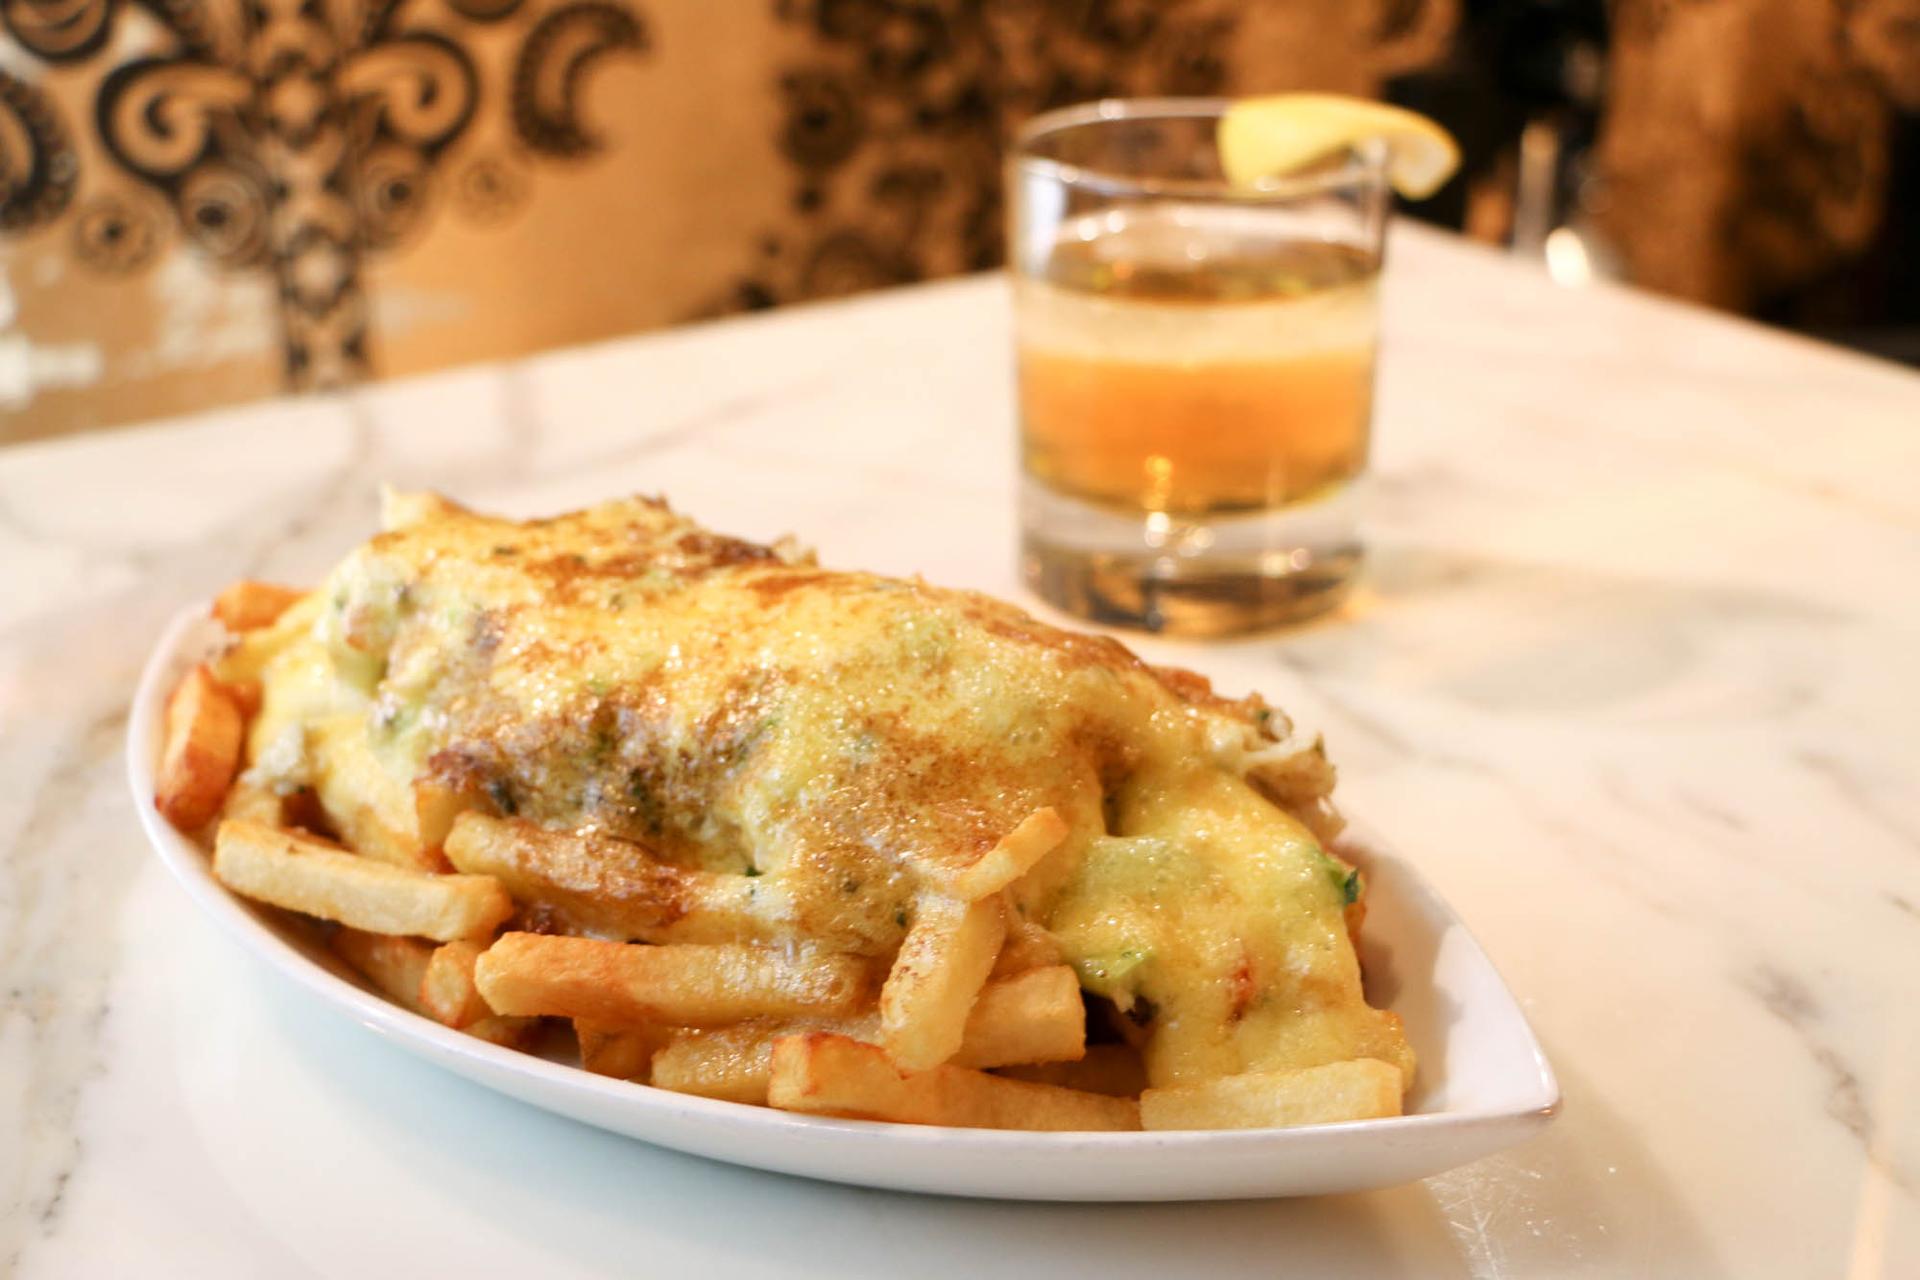 The Barrymore's poutine: fresh crab meat, asparagus, and béarnaise sauce over the top.